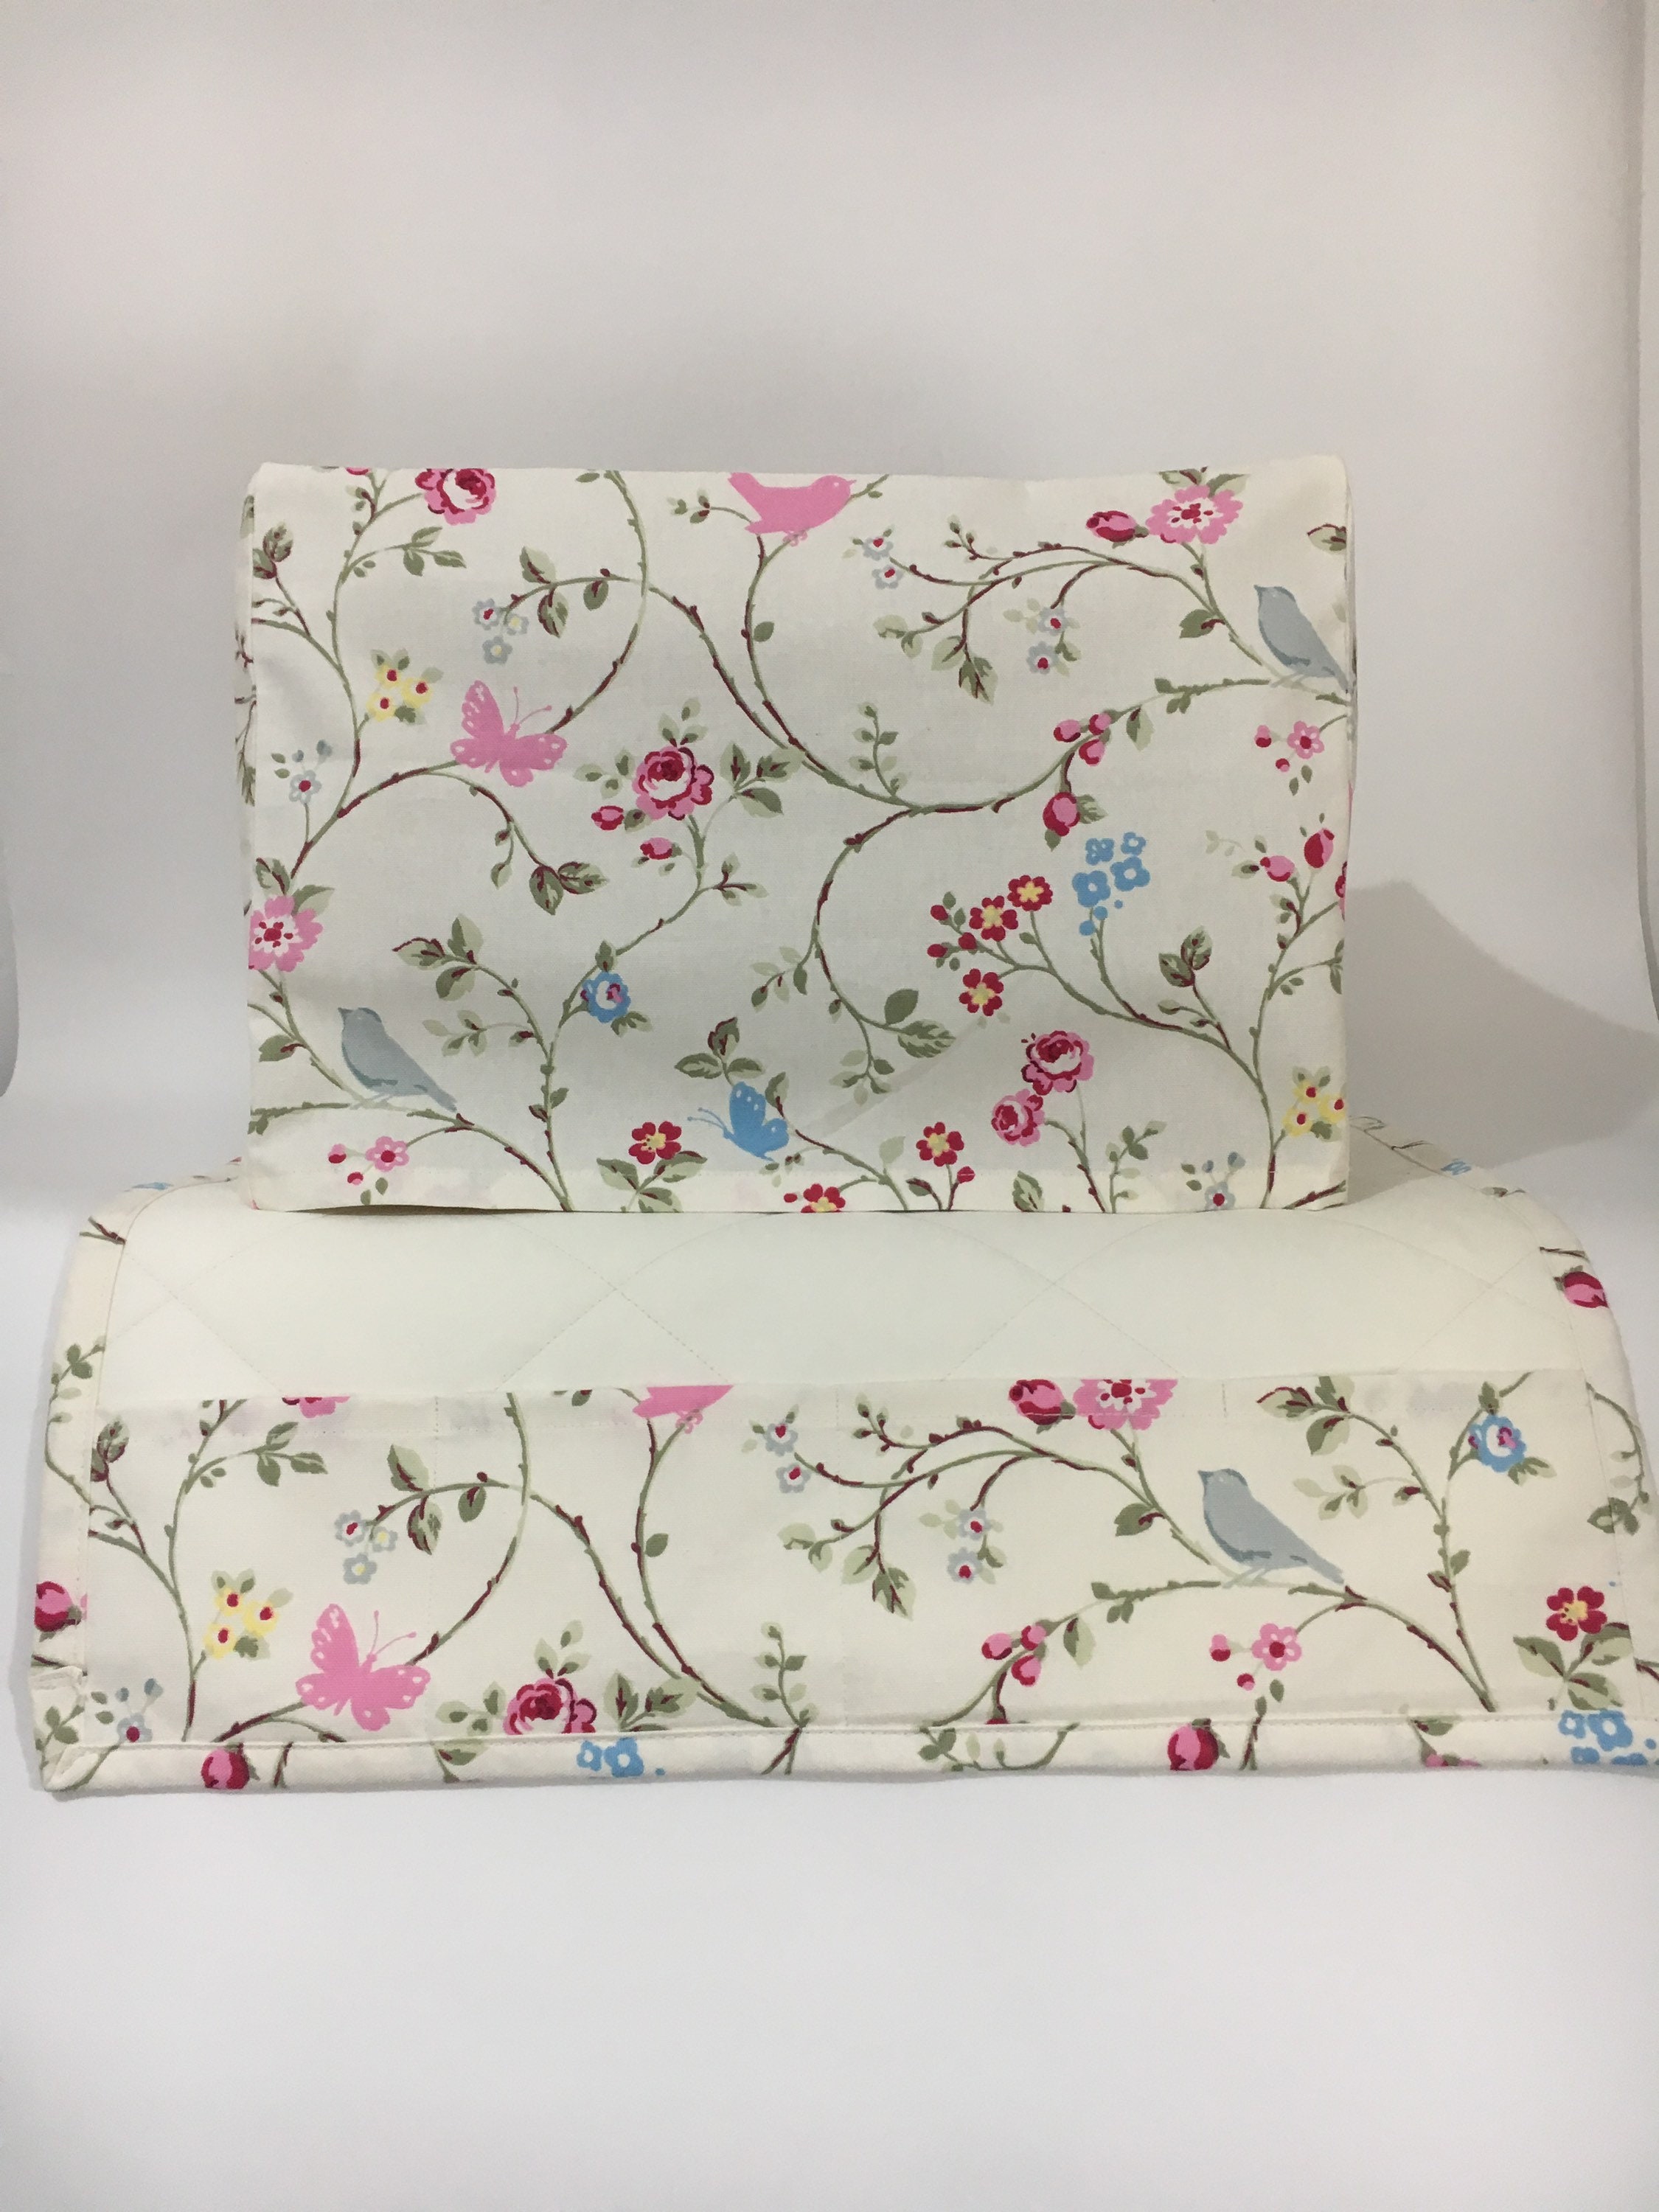 Bird Trail Fabric Shabby Chic Sewing Machine Cover/dust Cover 